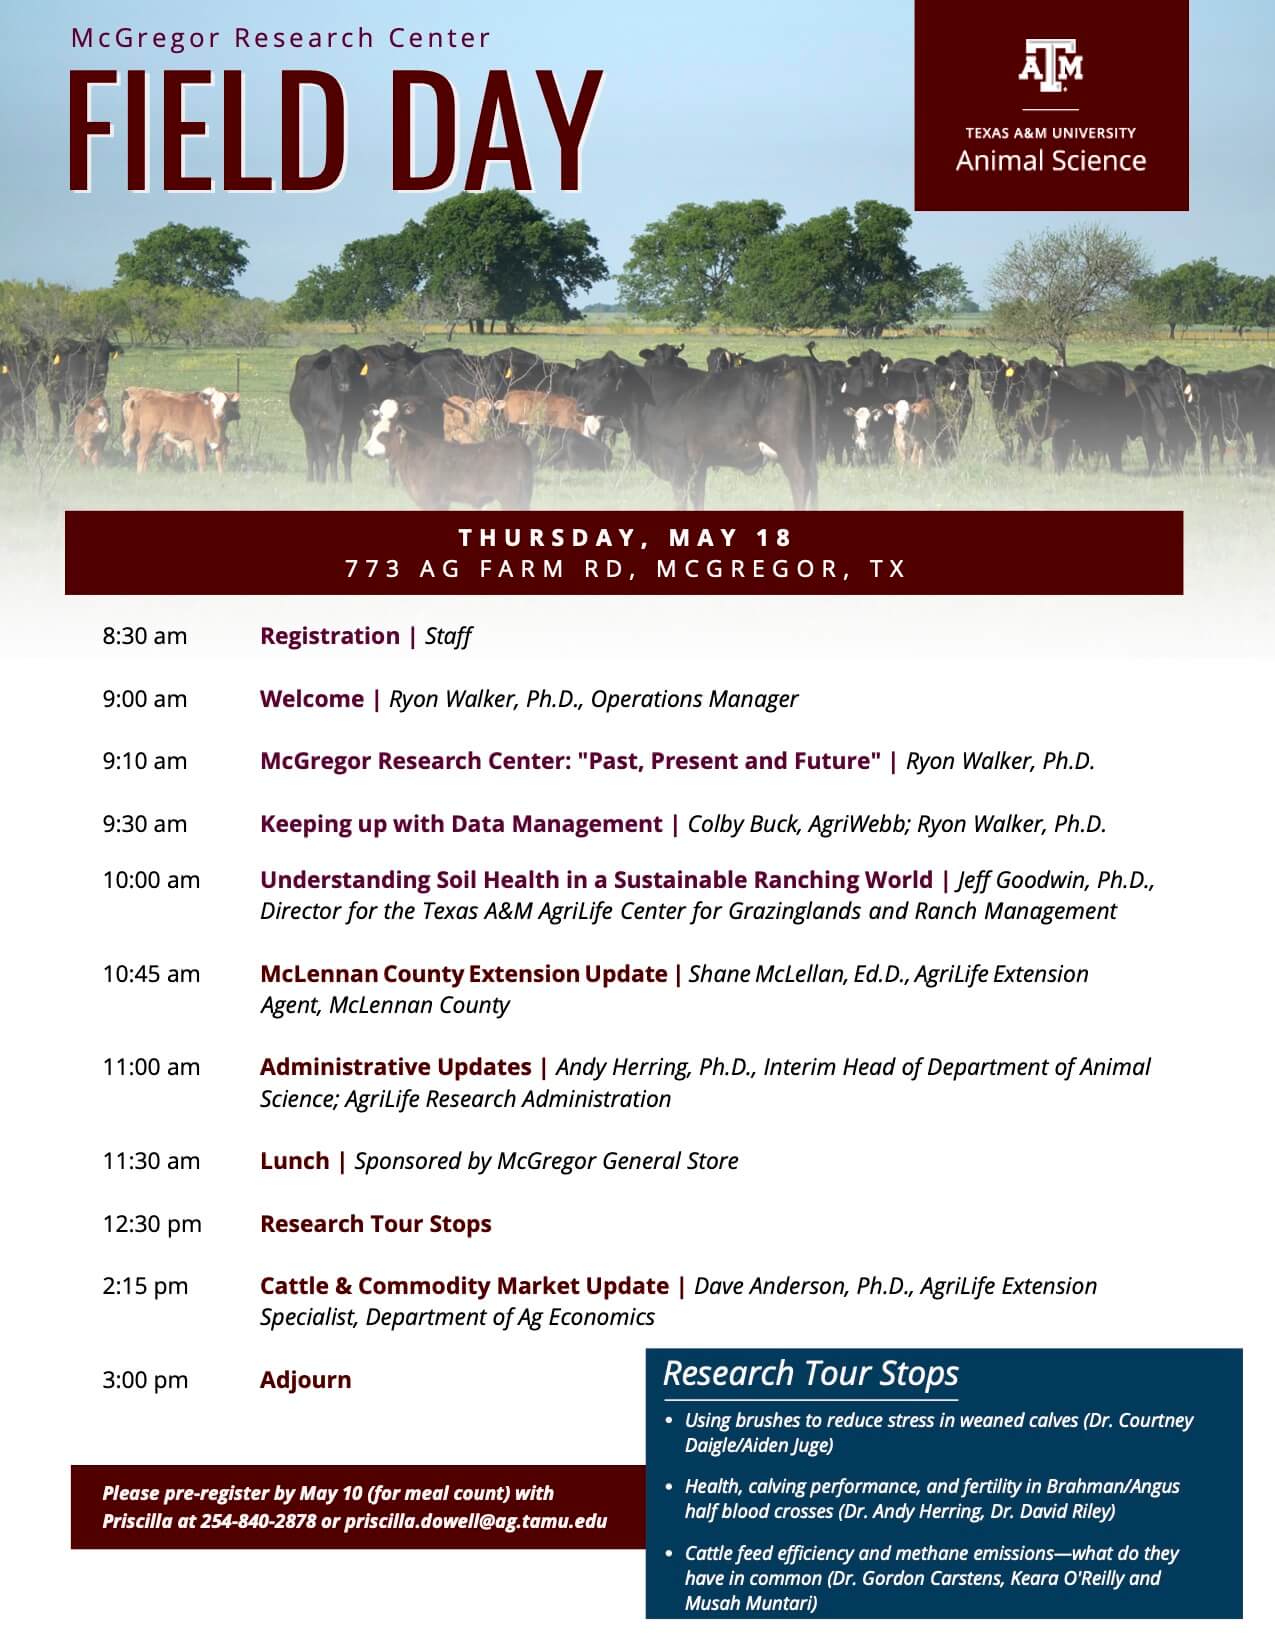 mcgregor field day texas a and m agrilife a&m thursday may 18